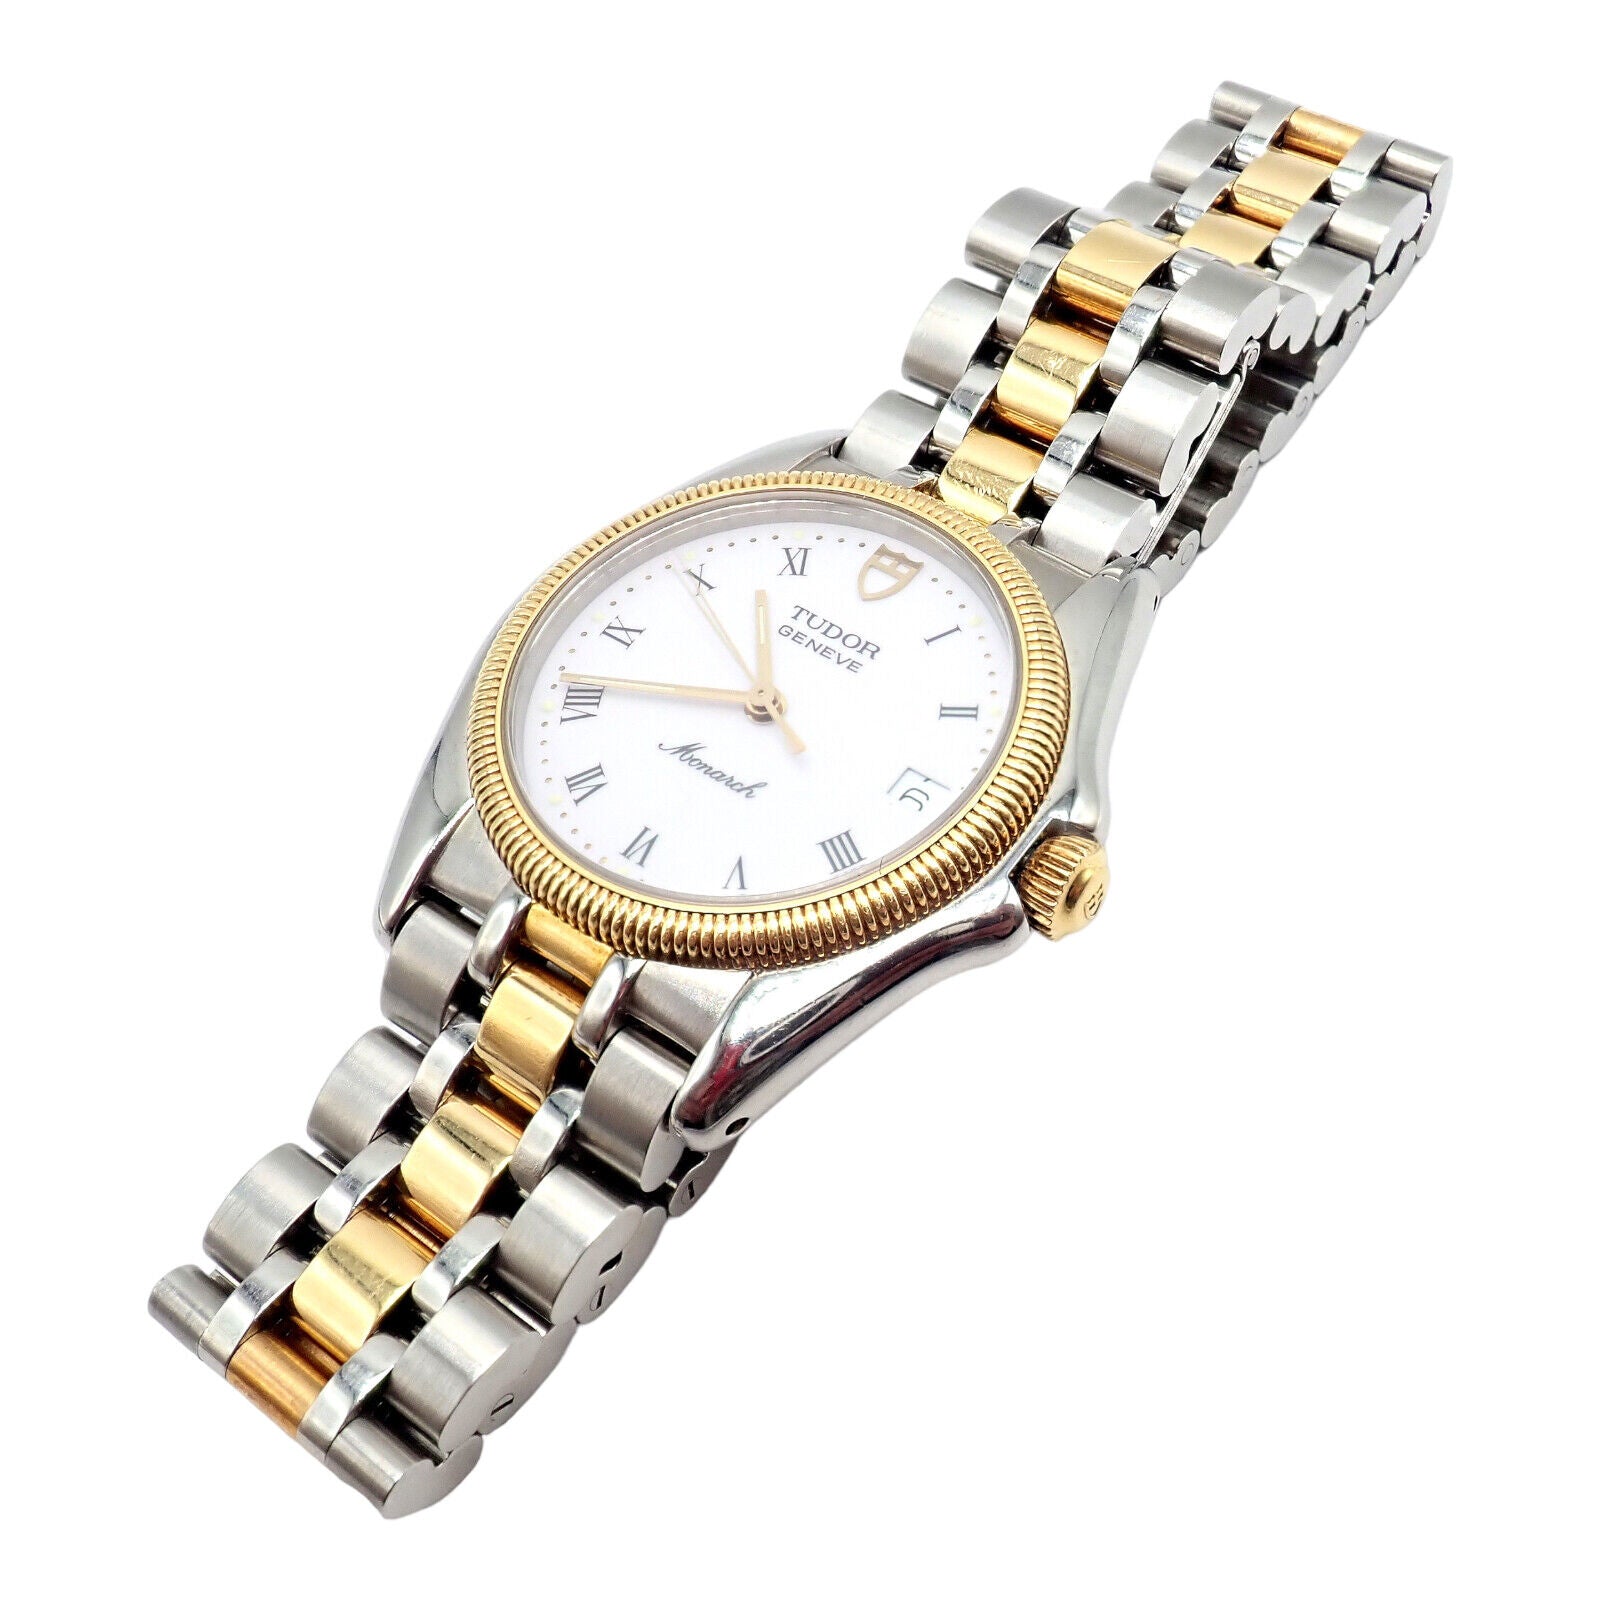 Tudor Jewelry & Watches:Watches, Parts & Accessories:Watches:Wristwatches Authentic Vintage! 1991 Tudor Stainless Steel Two Tone Quartz Watch 15733